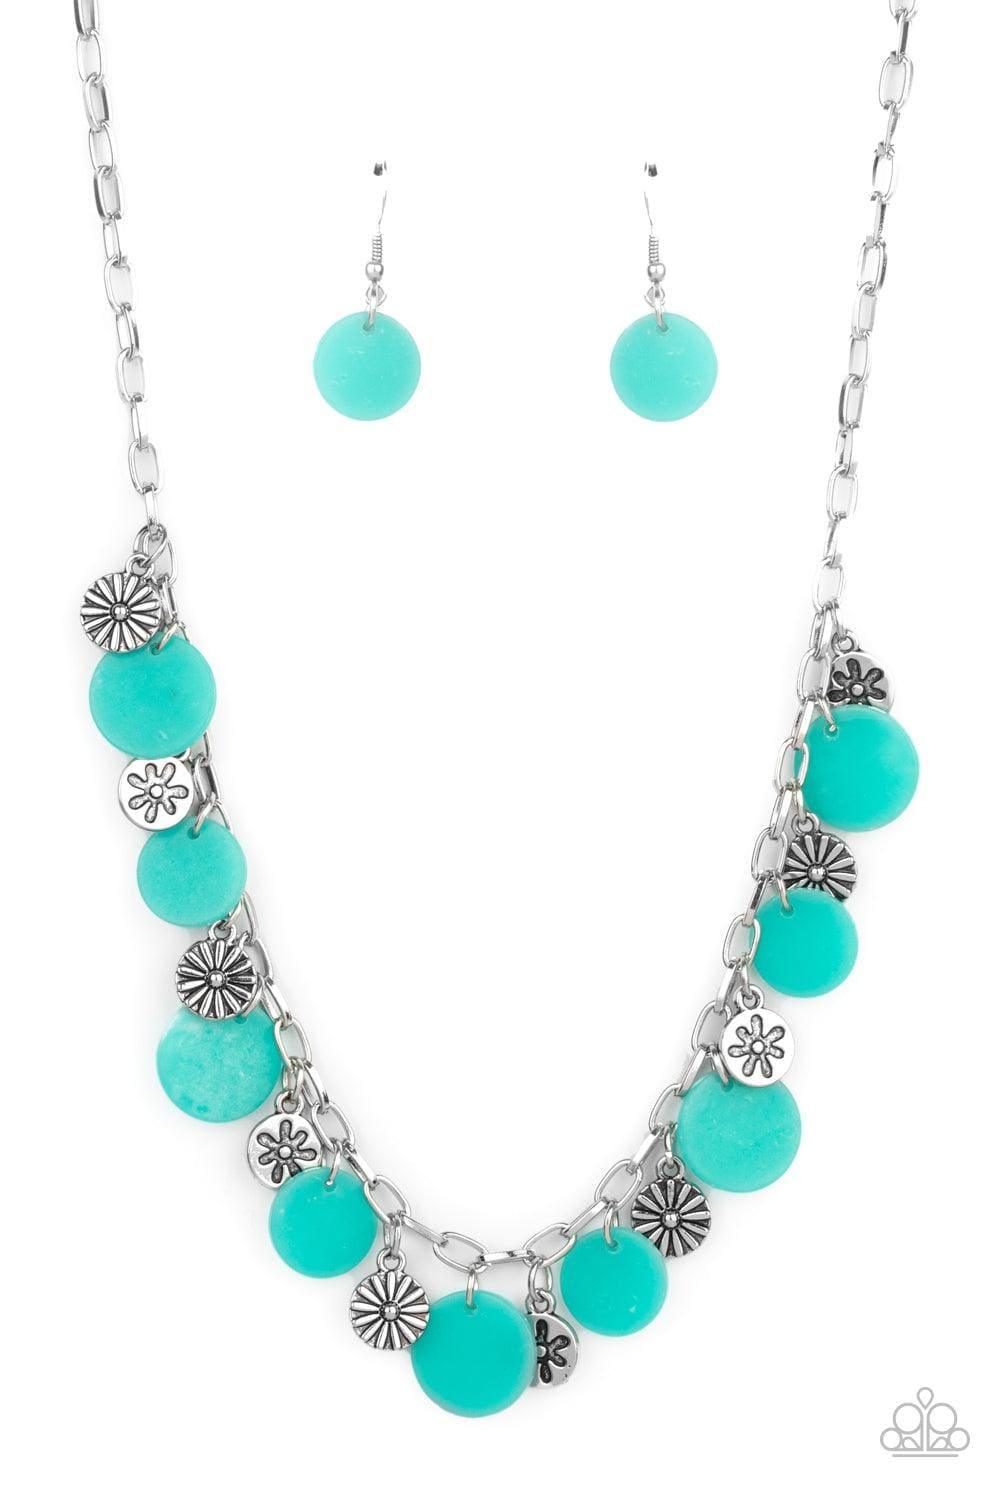 Paparazzi Accessories - Flower Powered - Blue Necklace - Bling by JessieK